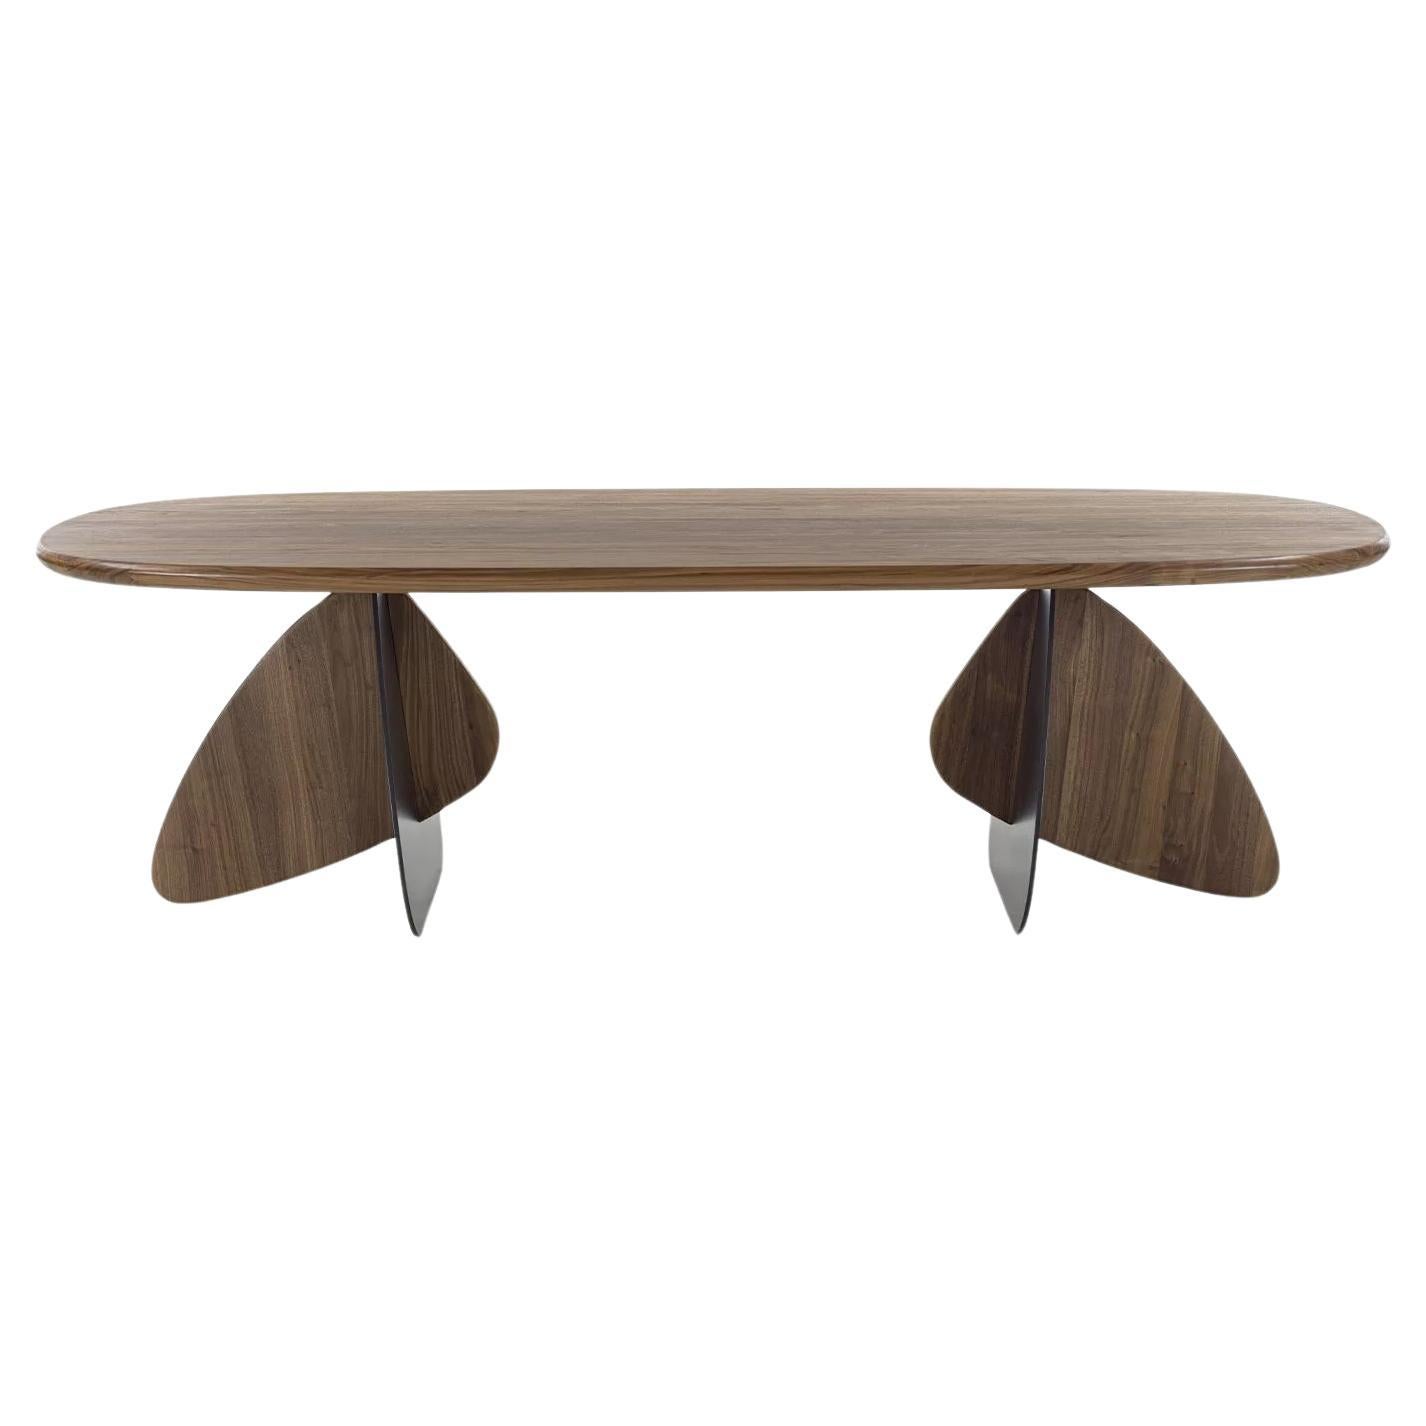 Cross Solid Wood & Iron Dining Table, Designed by Carlesi Tonelli, Made in Italy For Sale